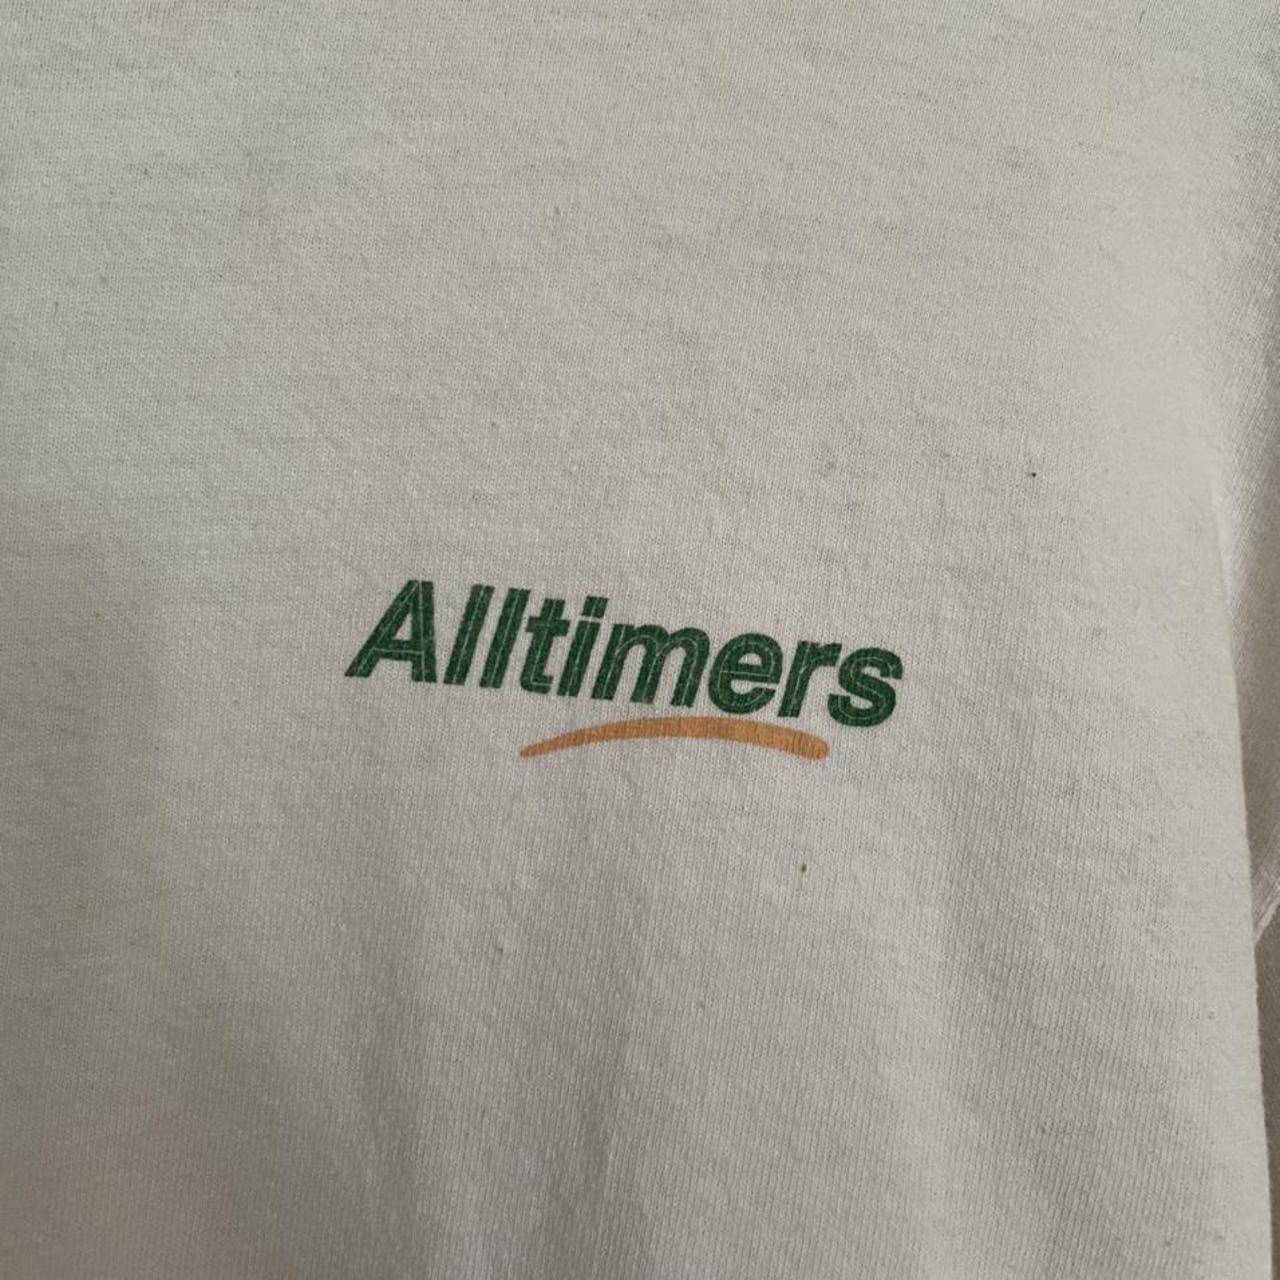 Product Image 3 - Alltimers Peachy Long Sleeve Tee

Bought